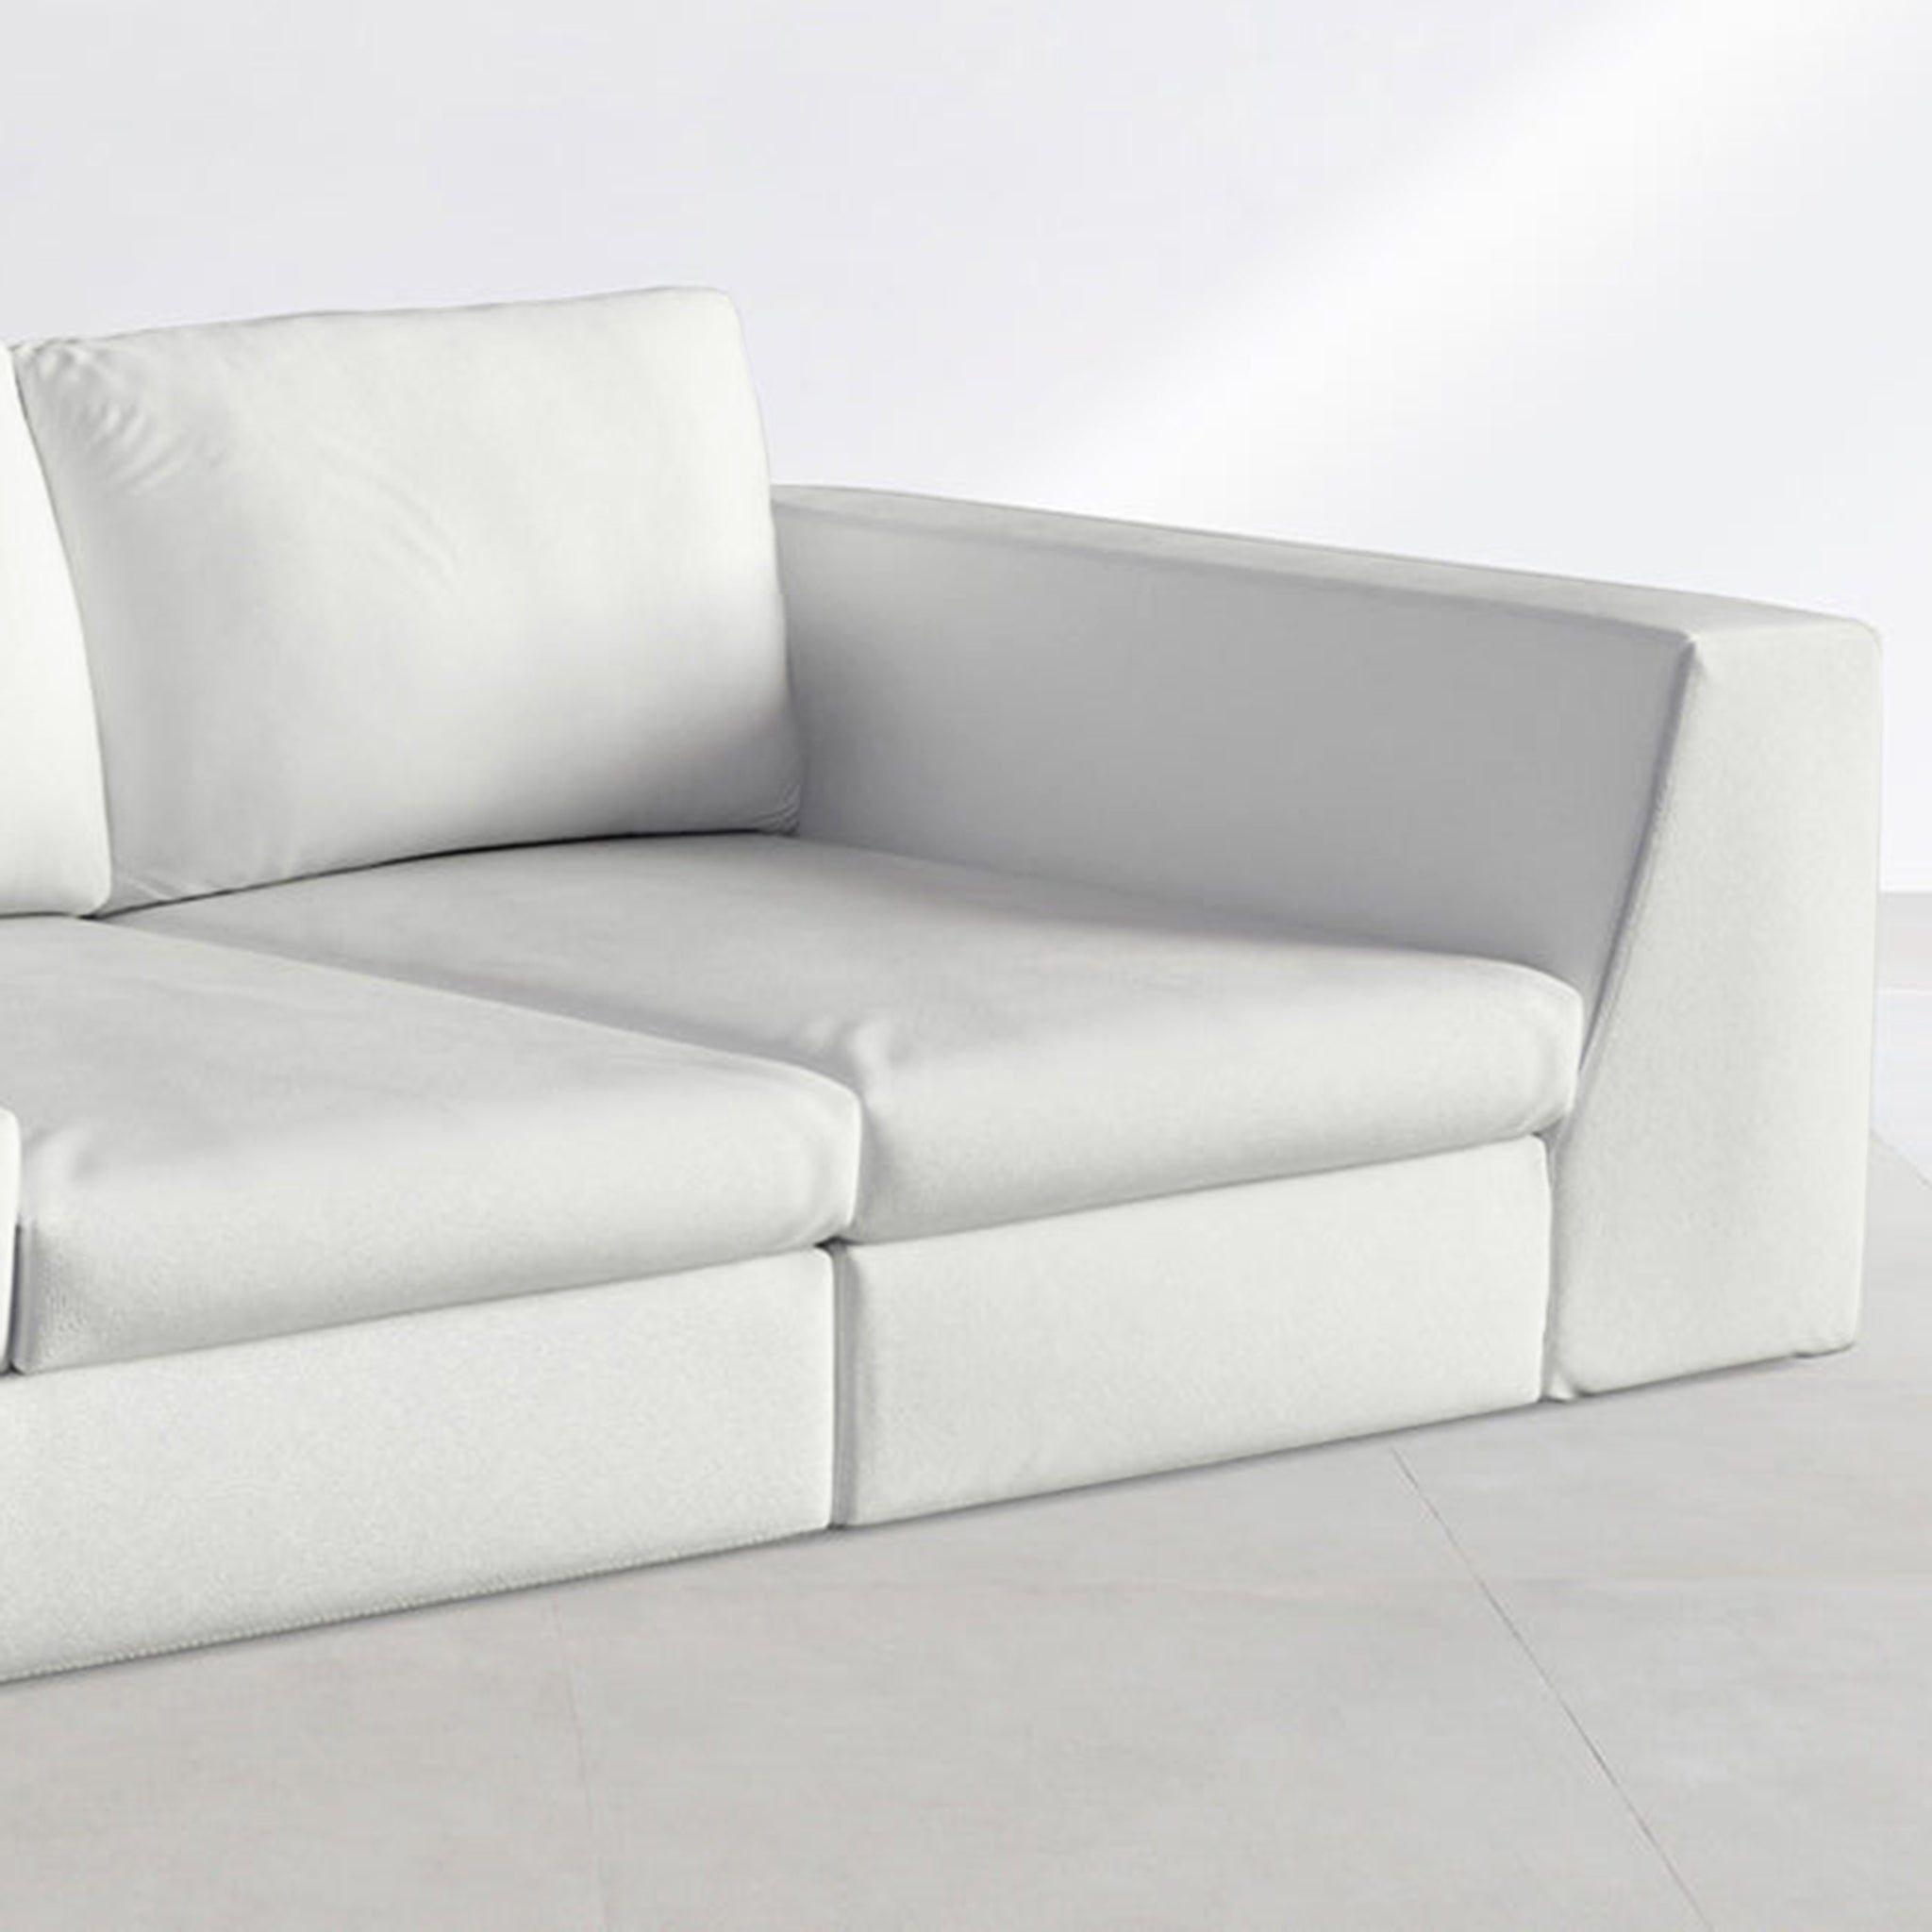 Close-up view of a white sofa featuring a cylindrical bolster pillow, highlighting the soft and luxurious fabric for a contemporary living room.